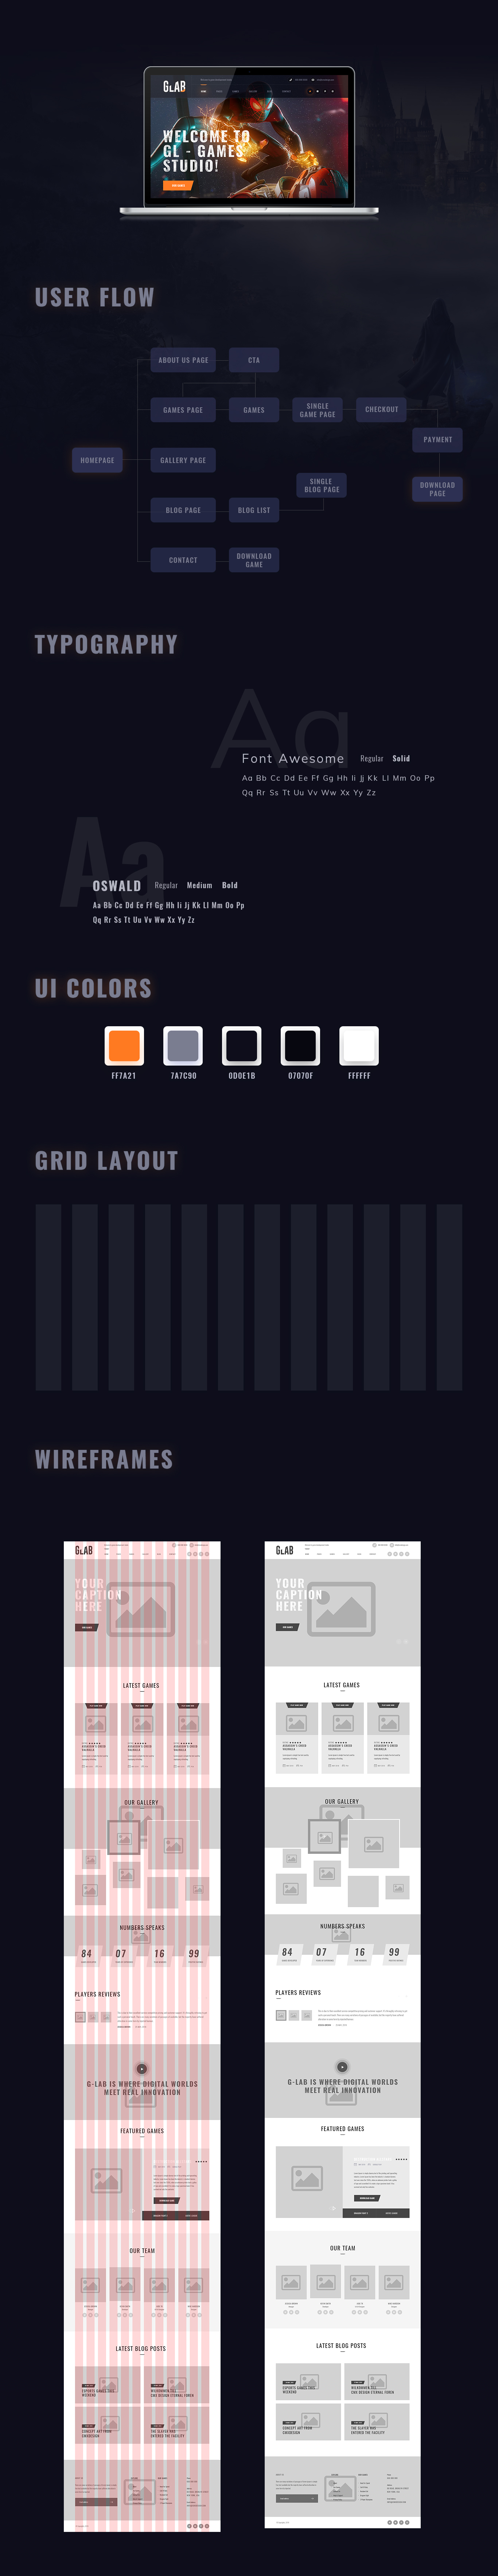 Gaming-Home-page-wireframe